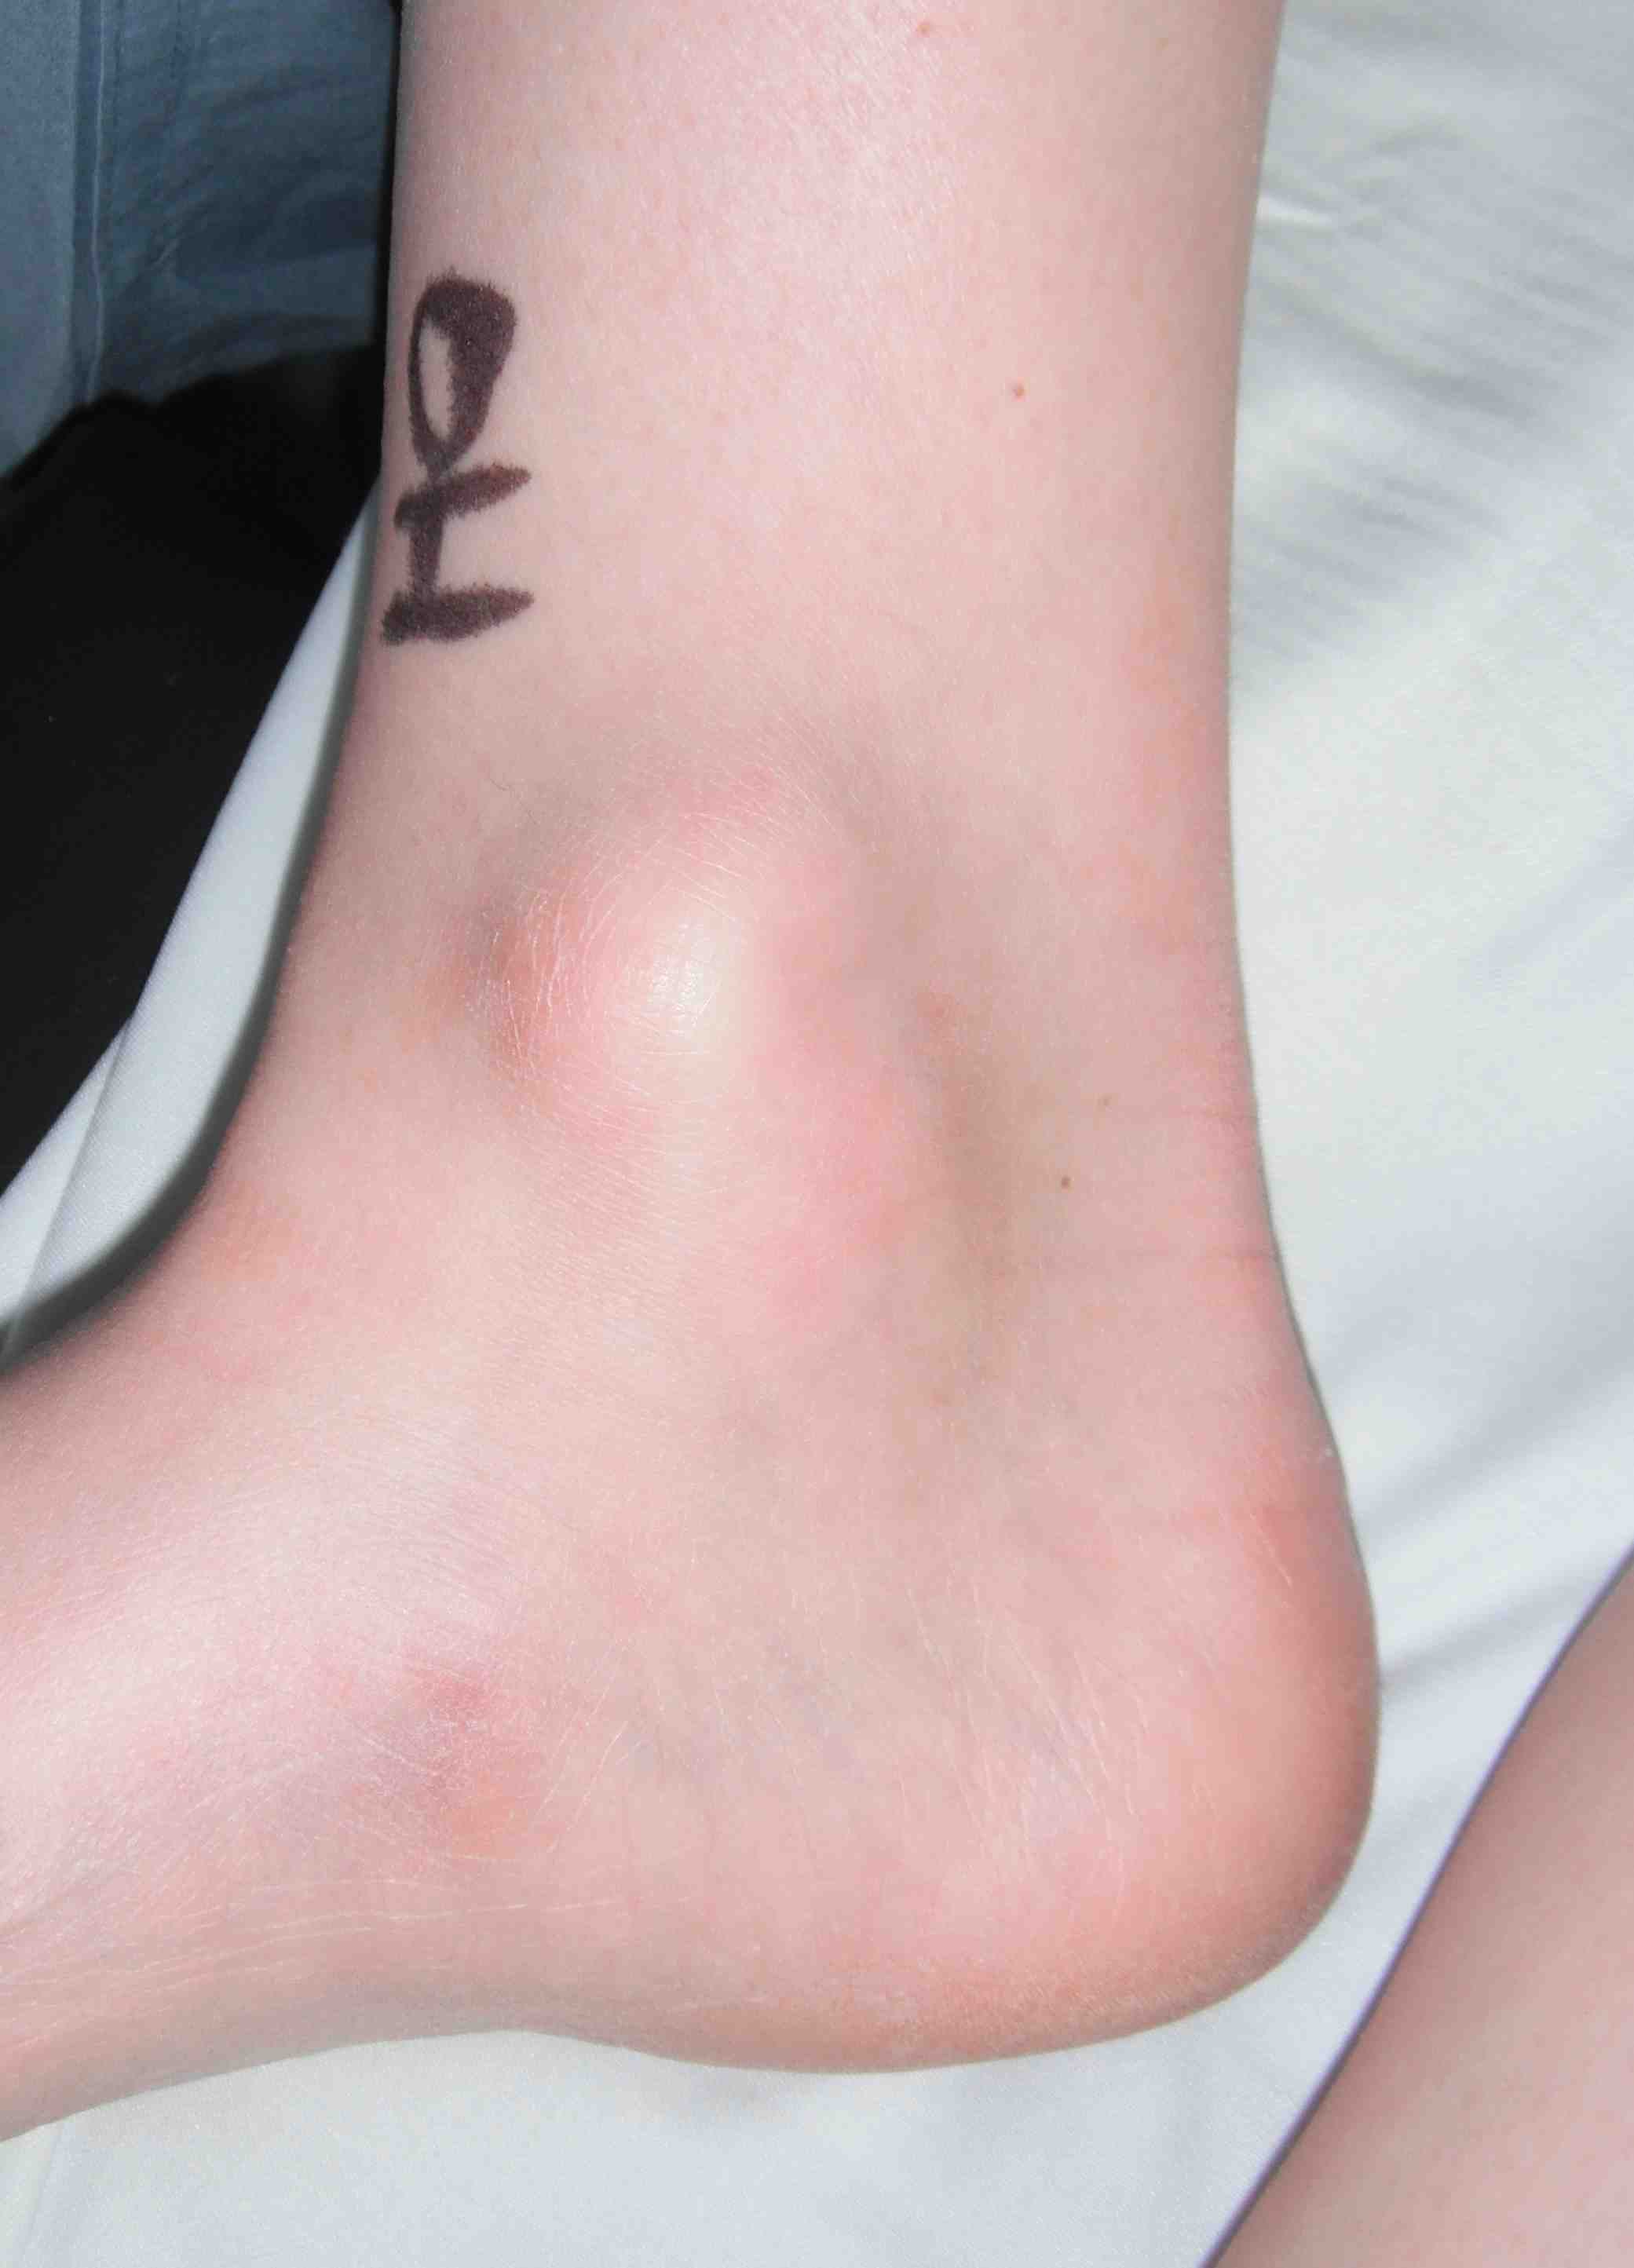 Ankle ganglion